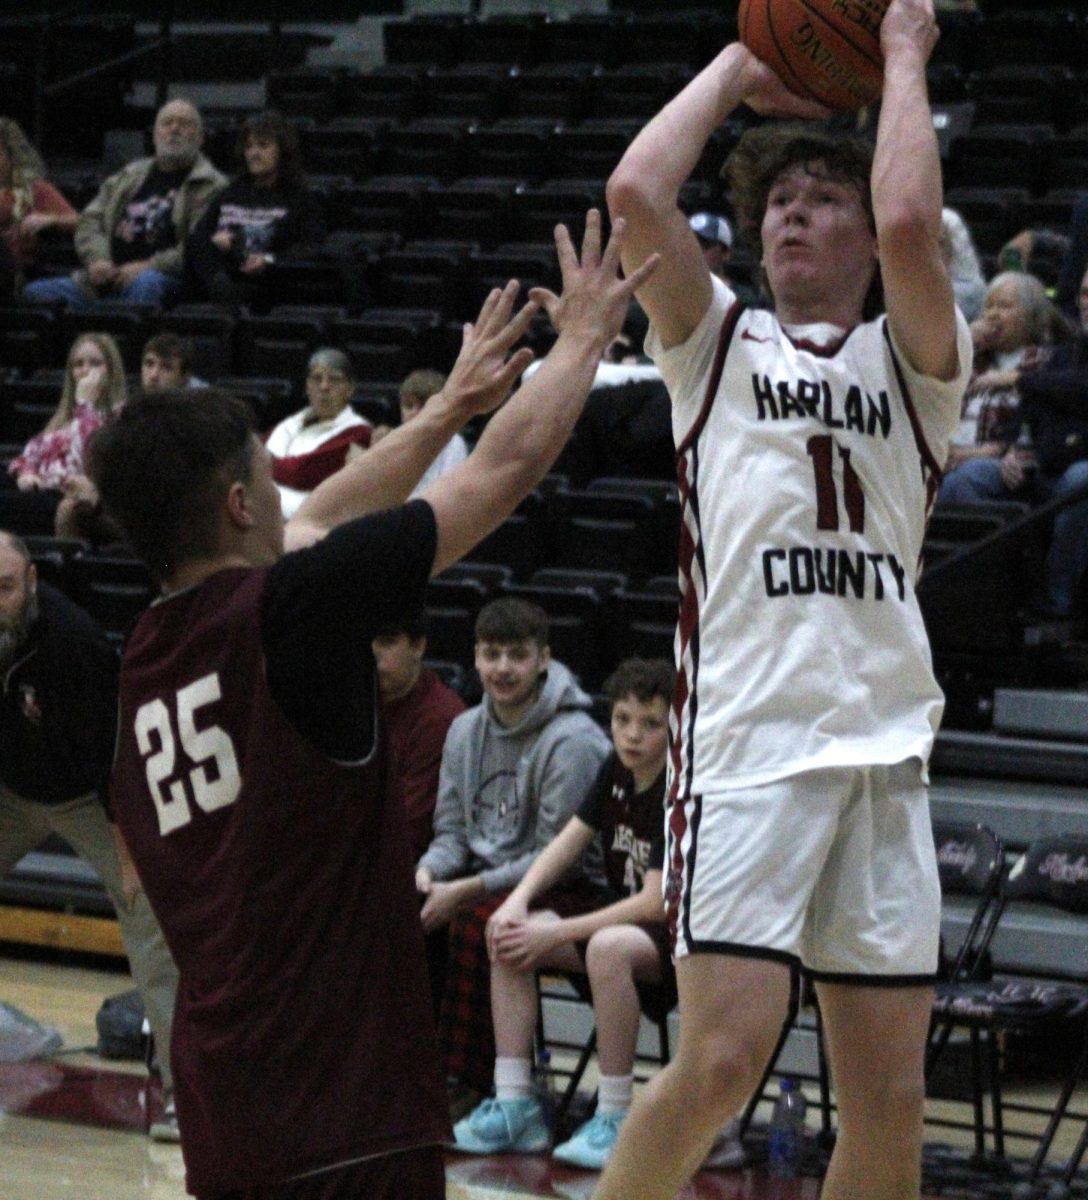 Harlan Countys Cole Cornett put up a shot in a freshman game Wednesday against visiting Leslie County. Cornett scored nine points in the Bears 51-36 win.